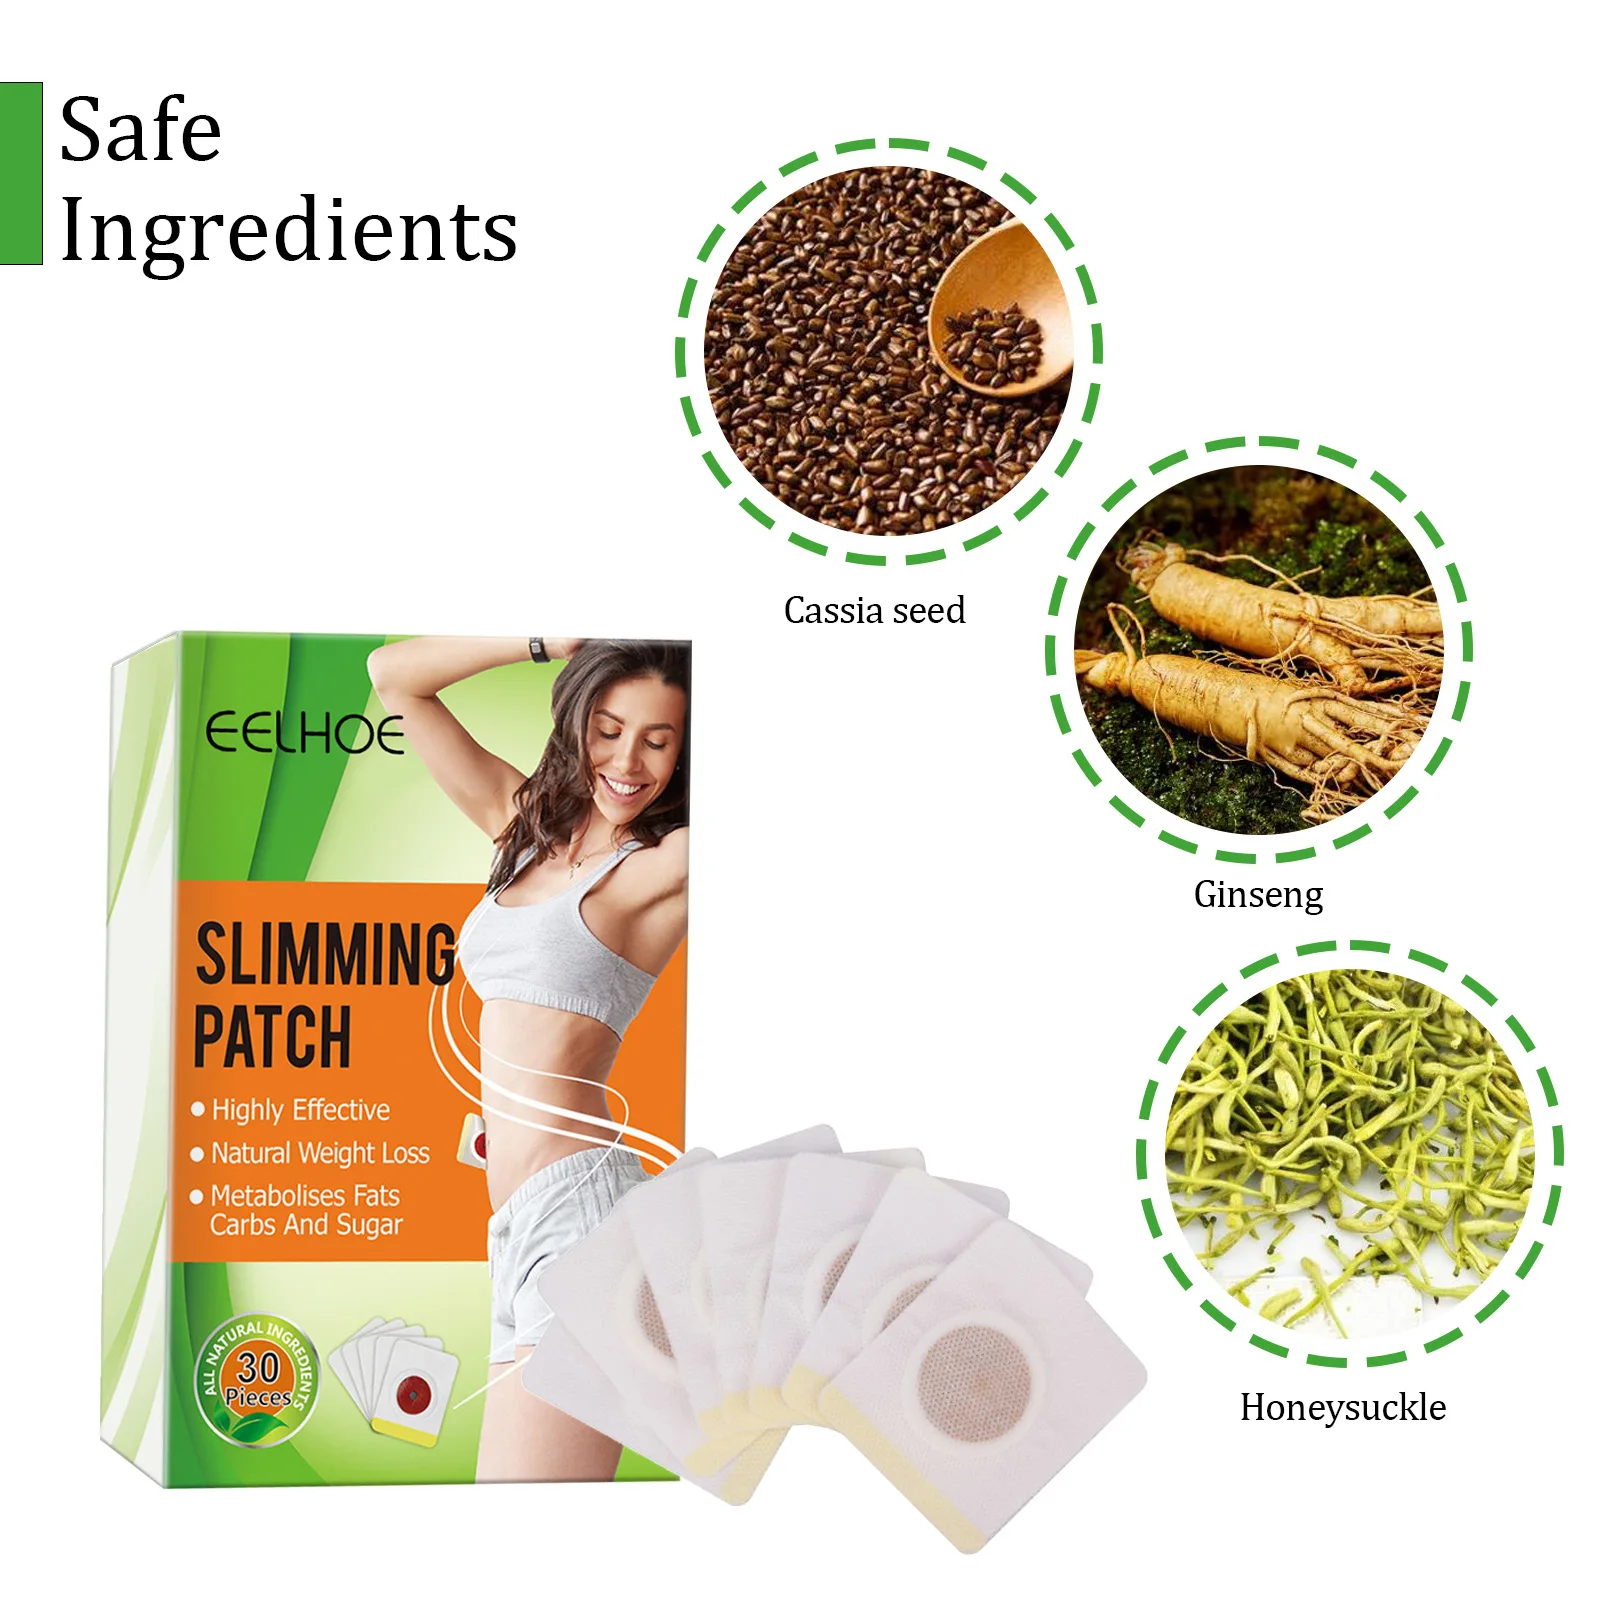 Effective Slimming Patch( Wholesale Price) in Oshodi - Tools